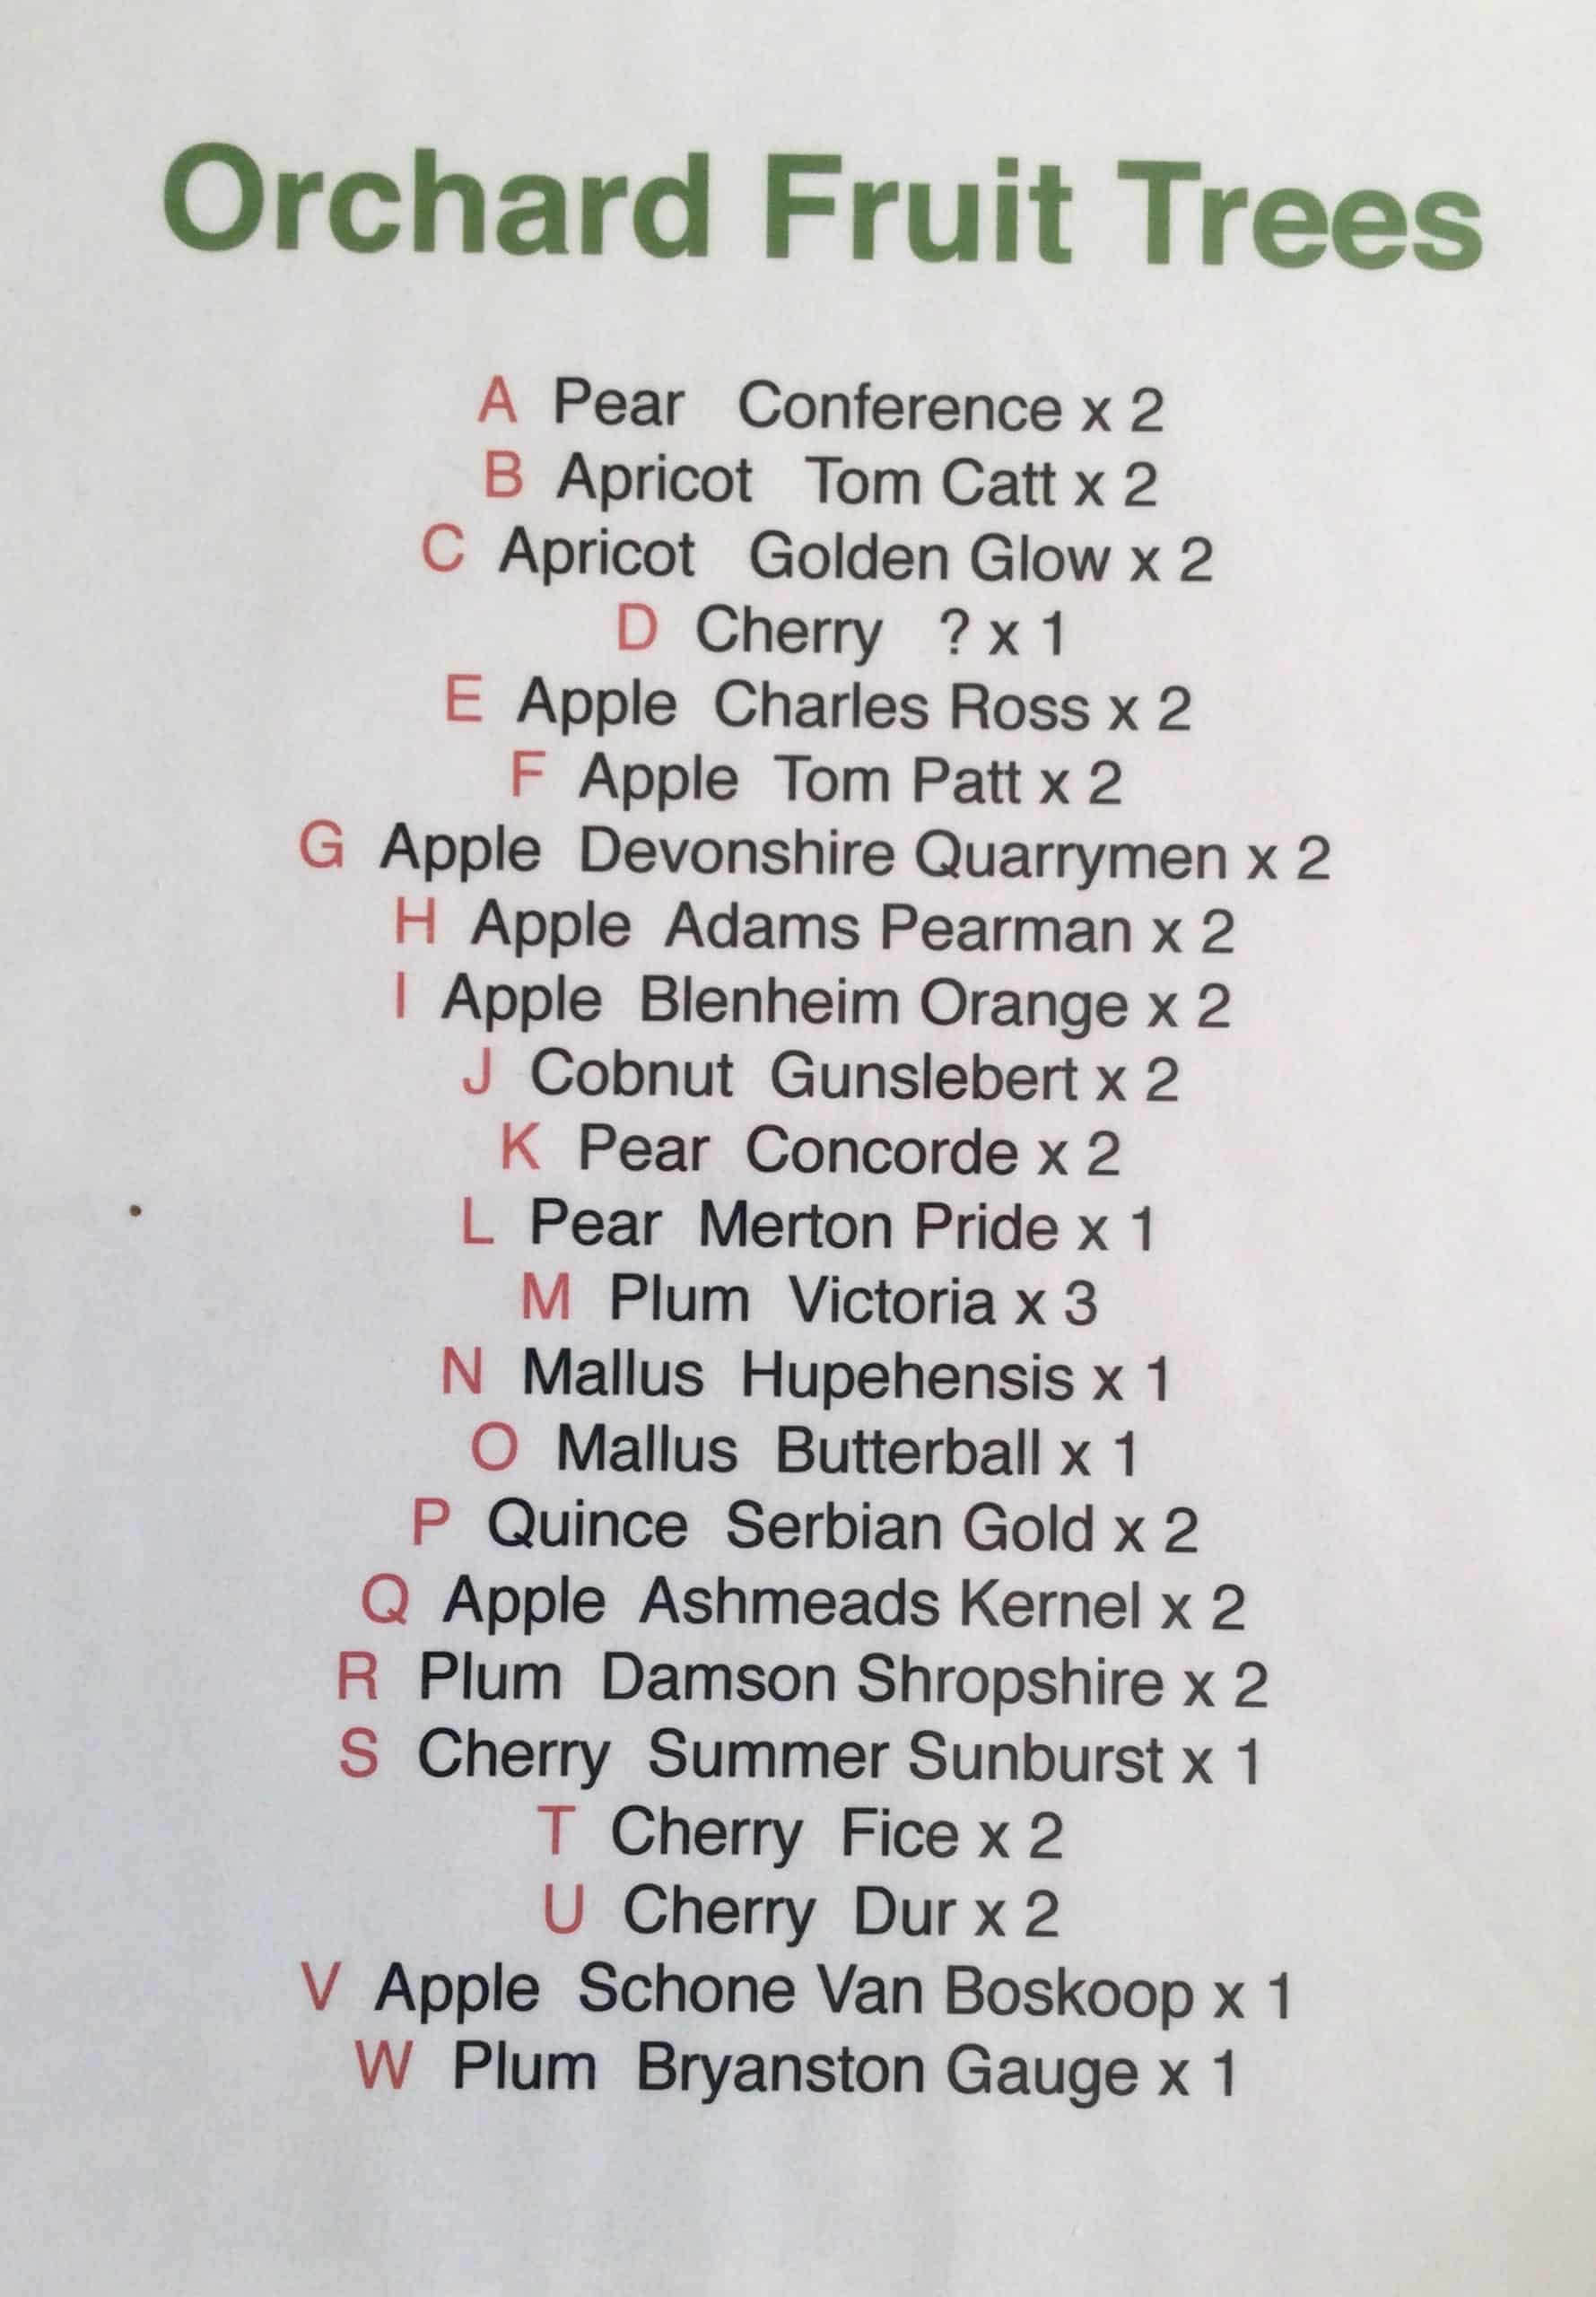 List of fruit trees in community orchard